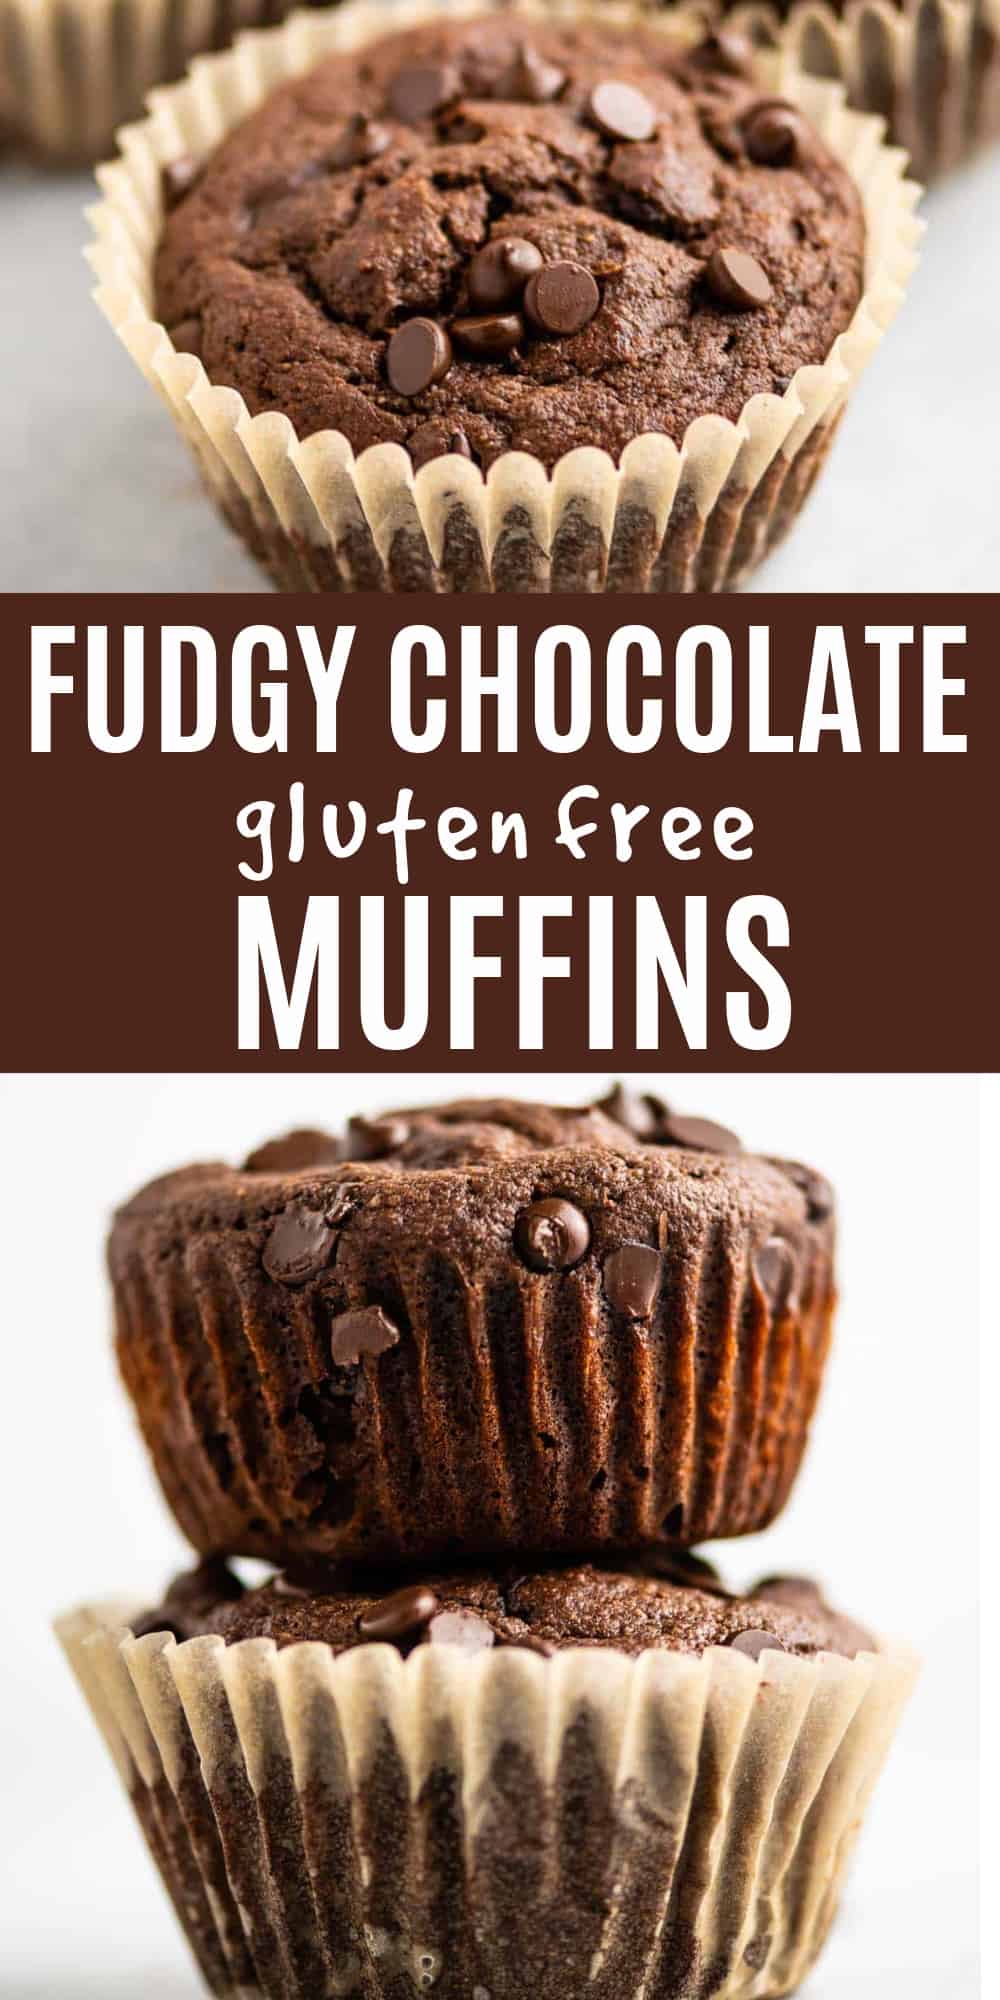 image with text "fudgy chocolate gluten free muffins"